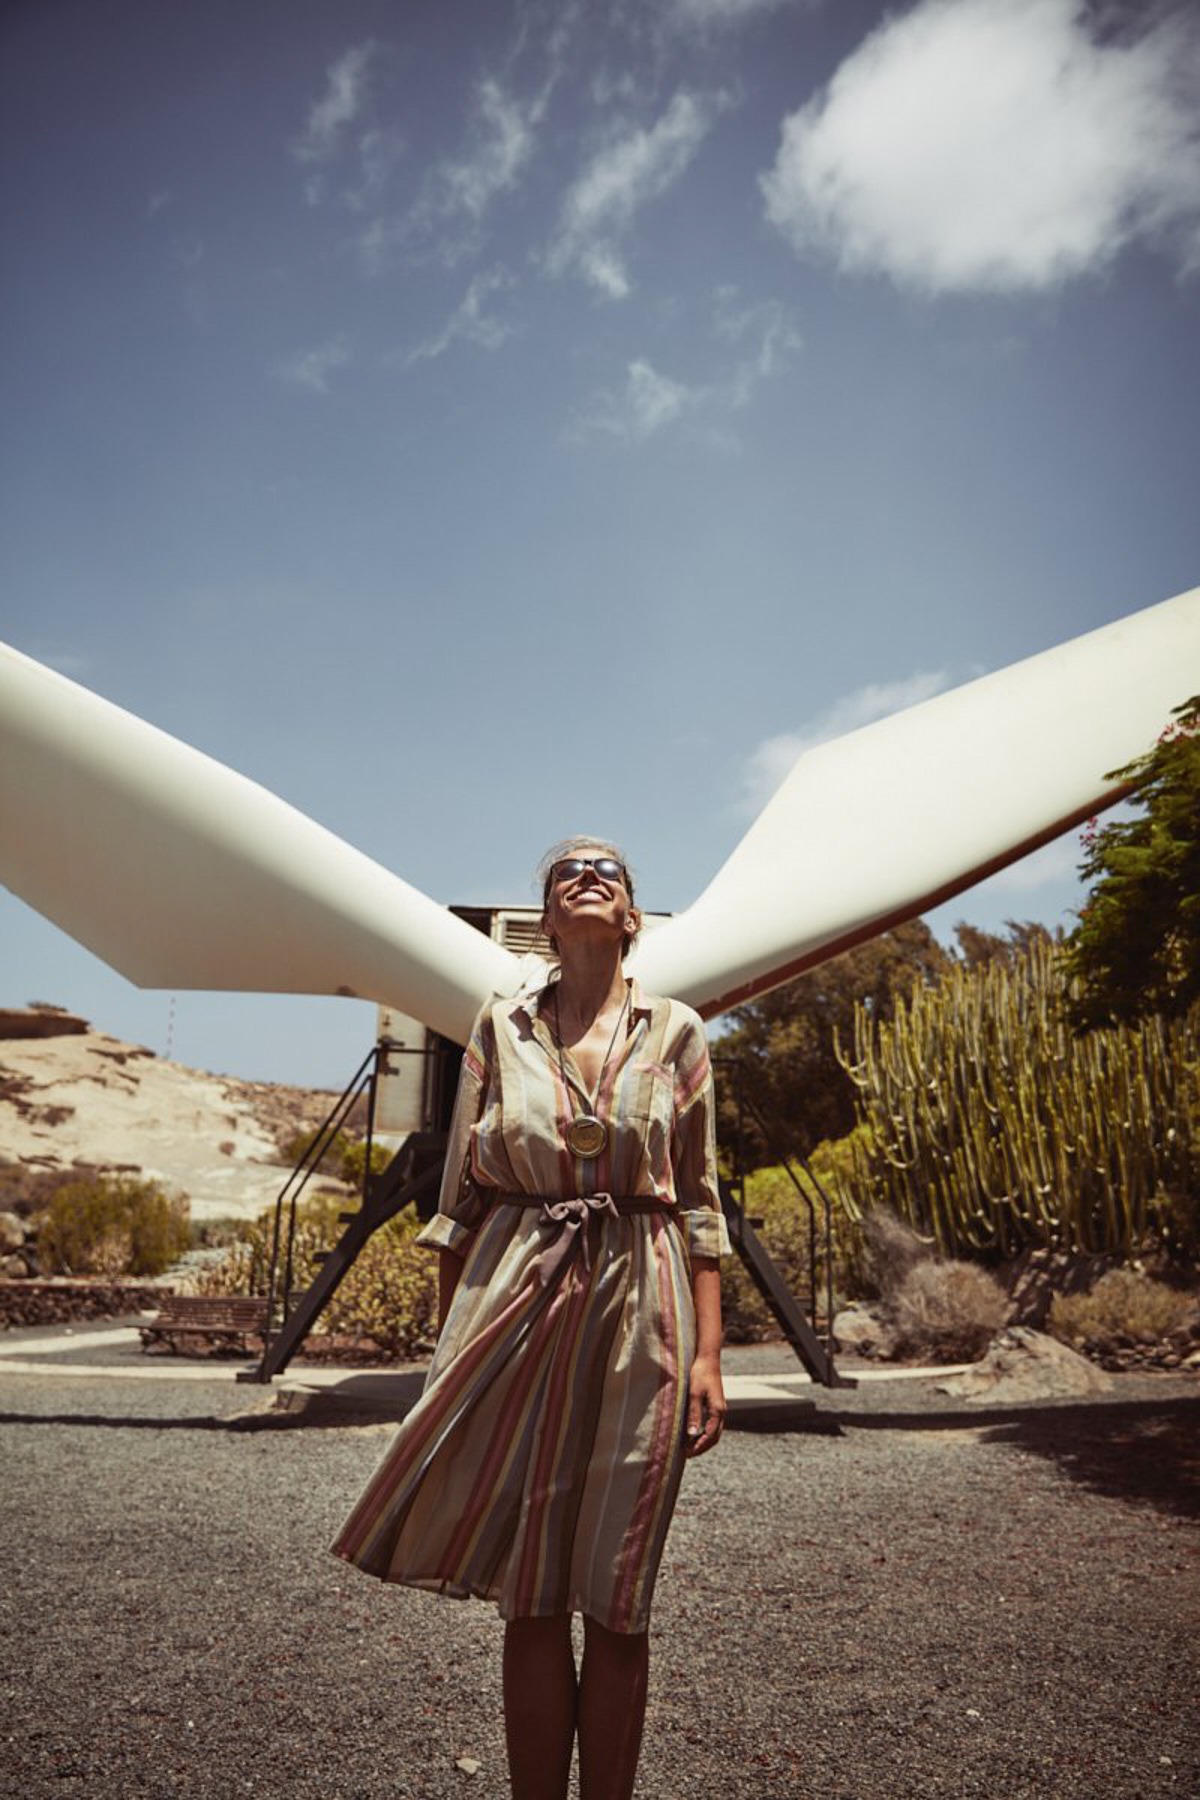 nissan magazine fuerteventura (19 images) by Mike Meyer Photography